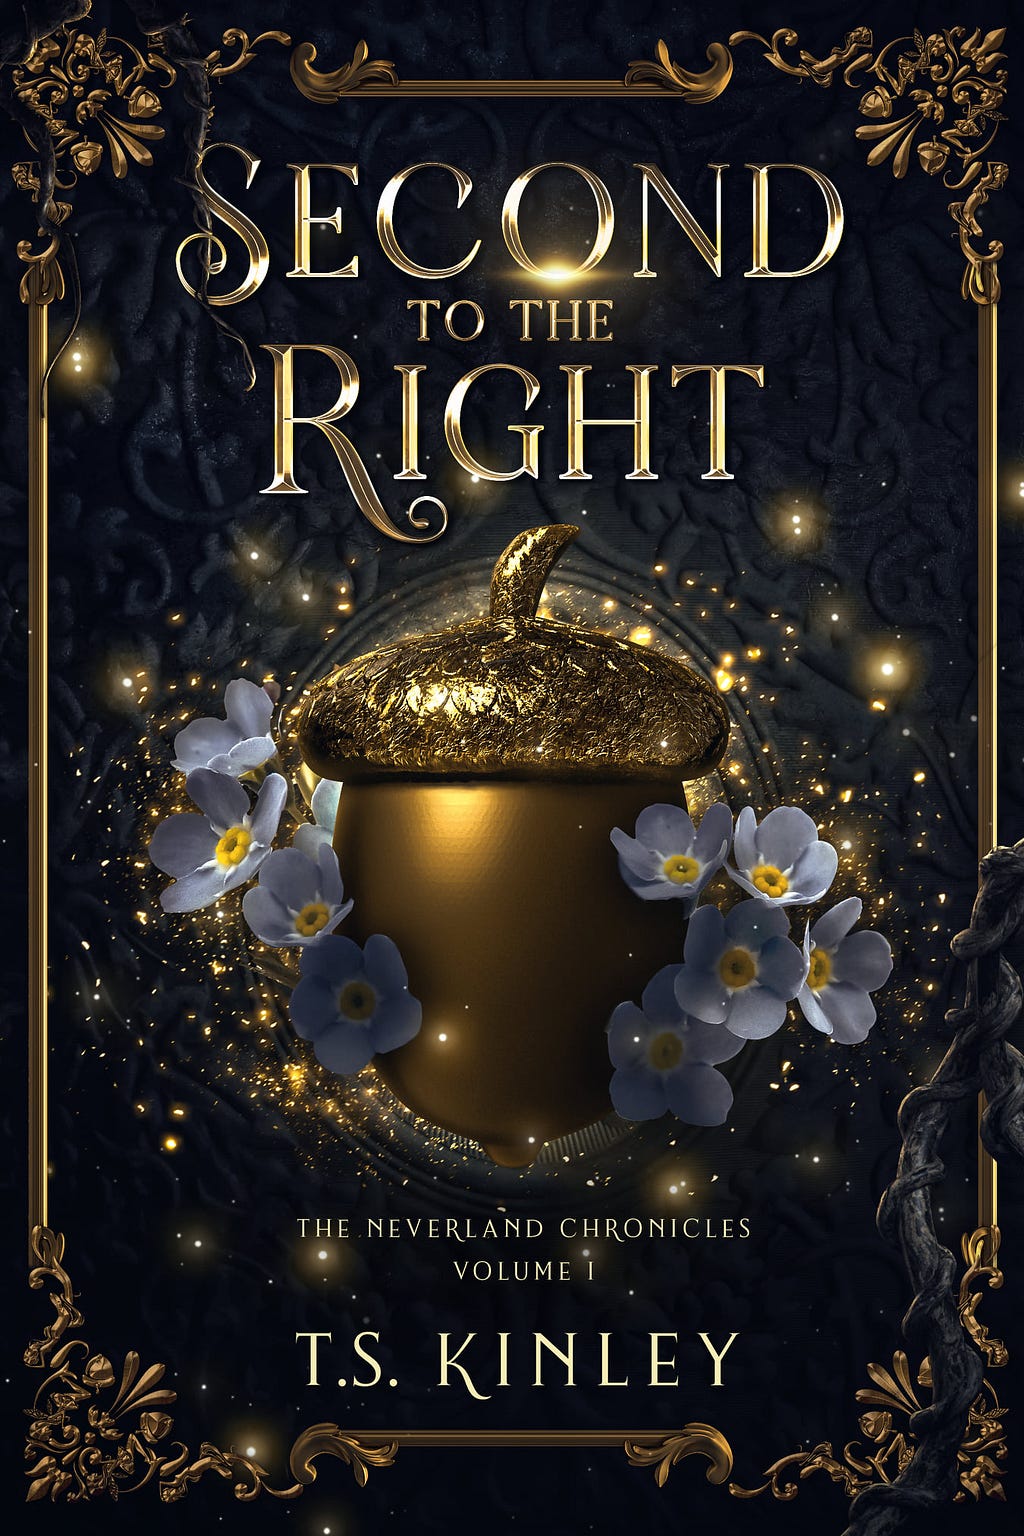 PDF Second to the Right (The Neverland Chronicles, #1) By T.S. Kinley